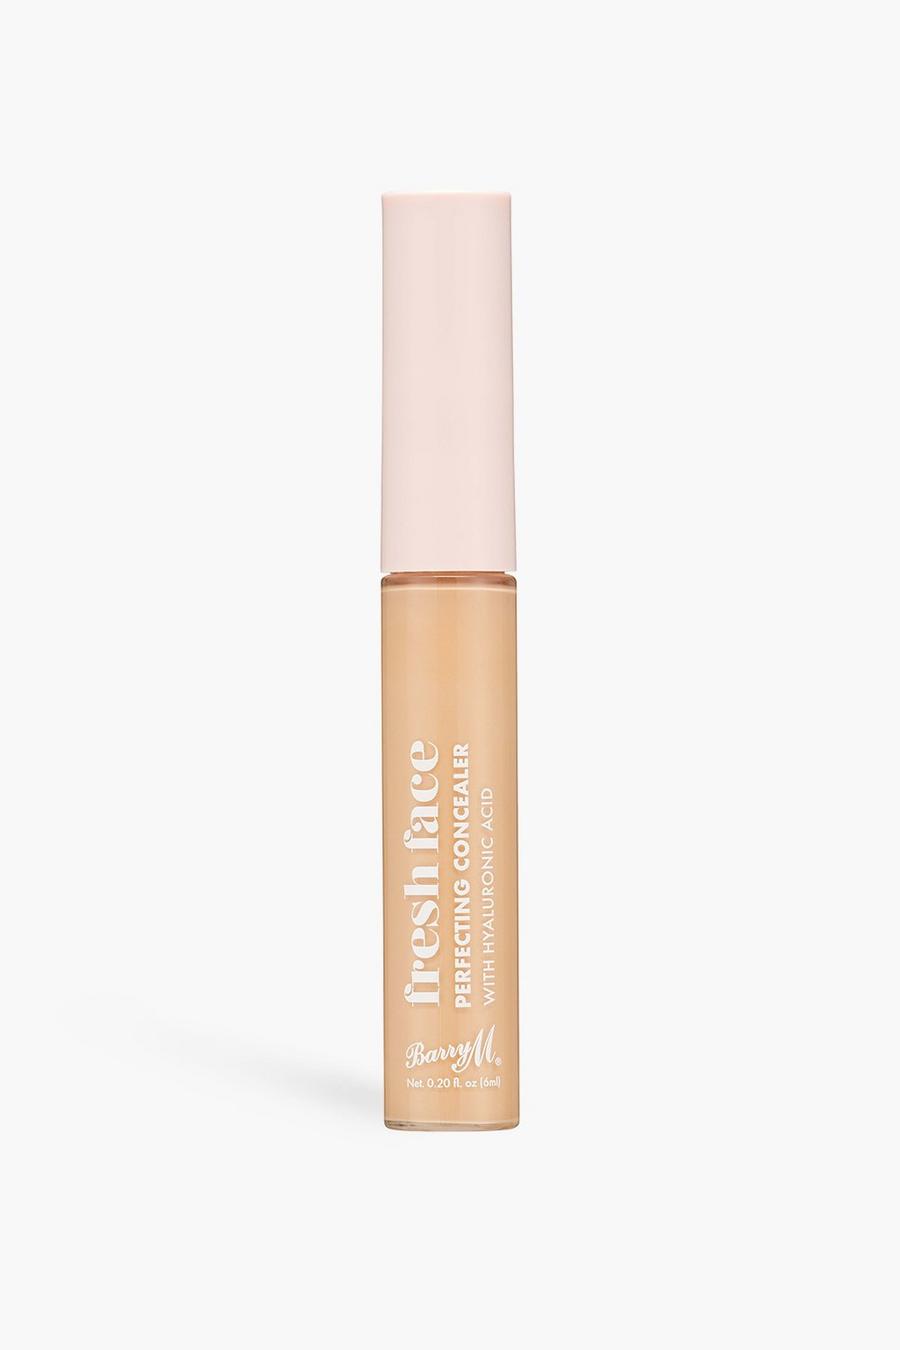 Barry M Fresh Face Perfecting Concealer 4, Tan marron